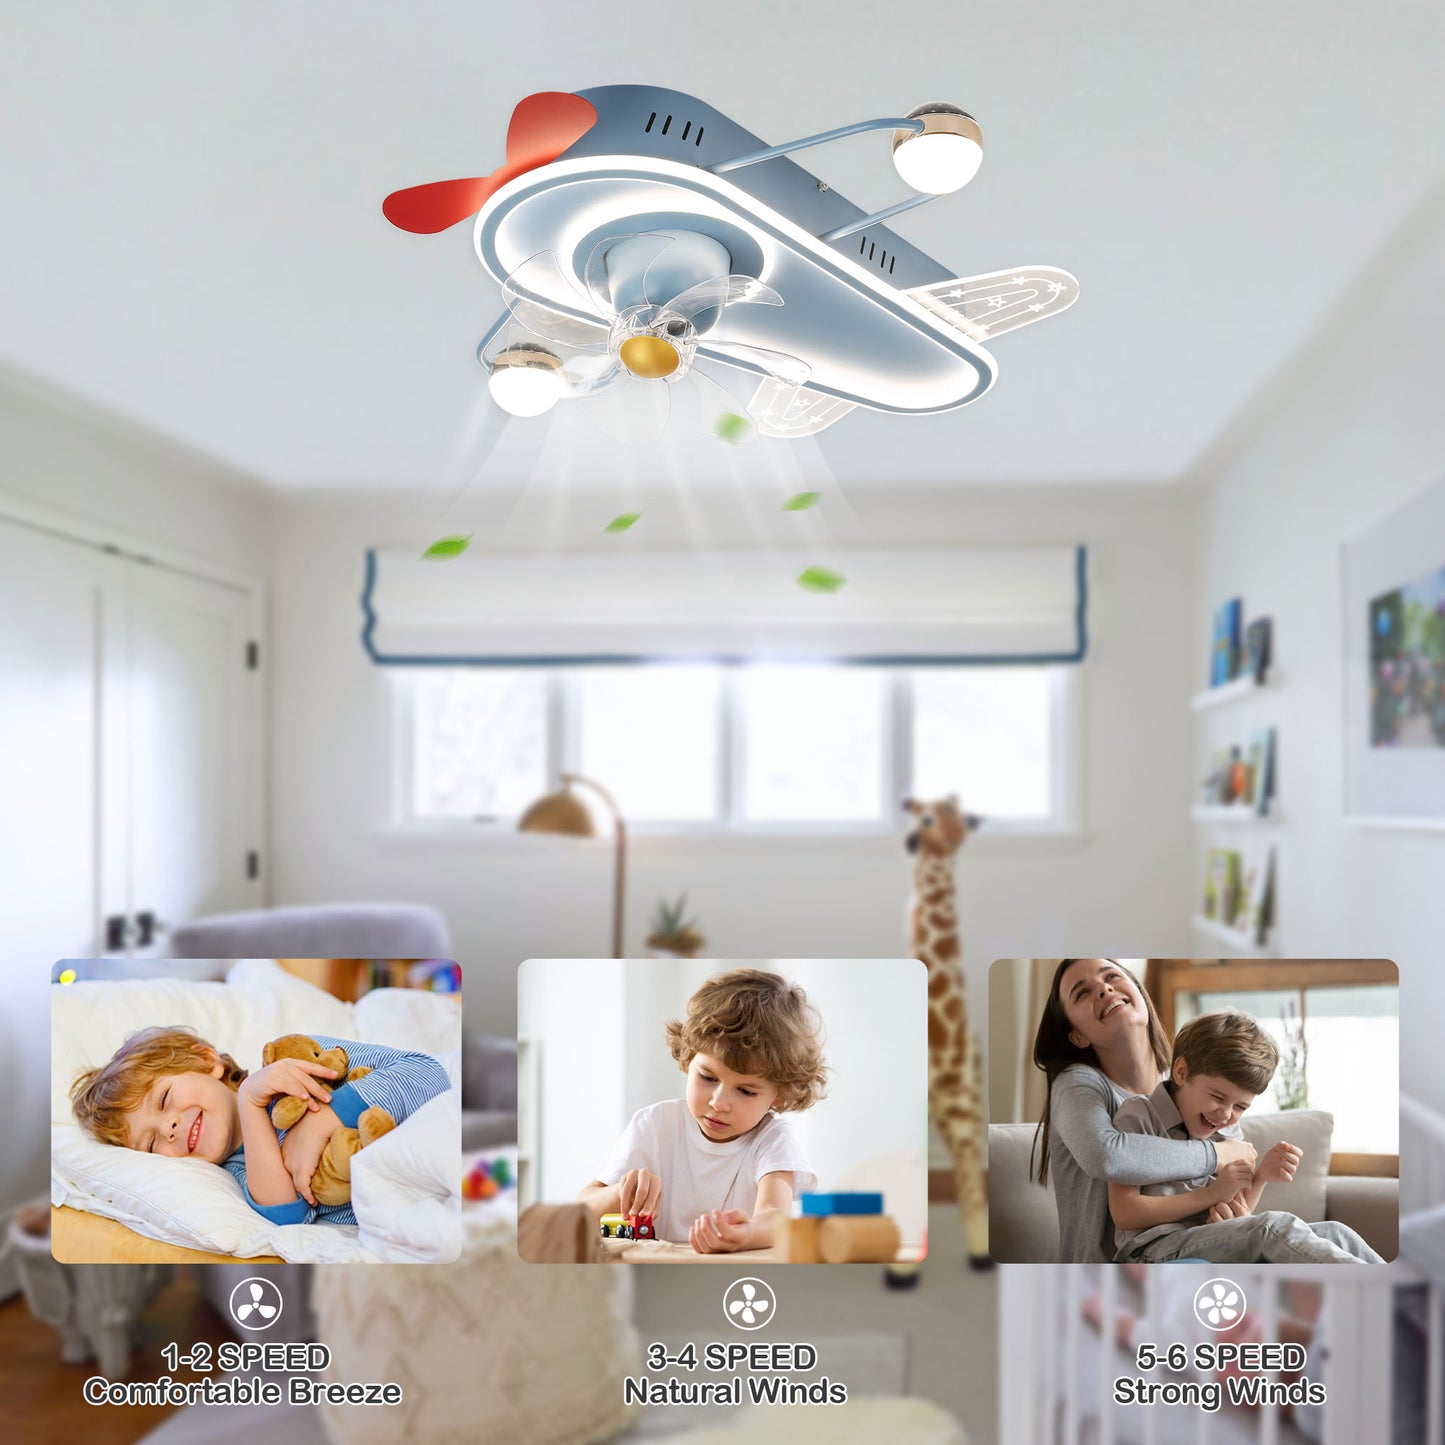 26 in. Cartoon Low Profile Ceiling Fan with LED Light and Remote